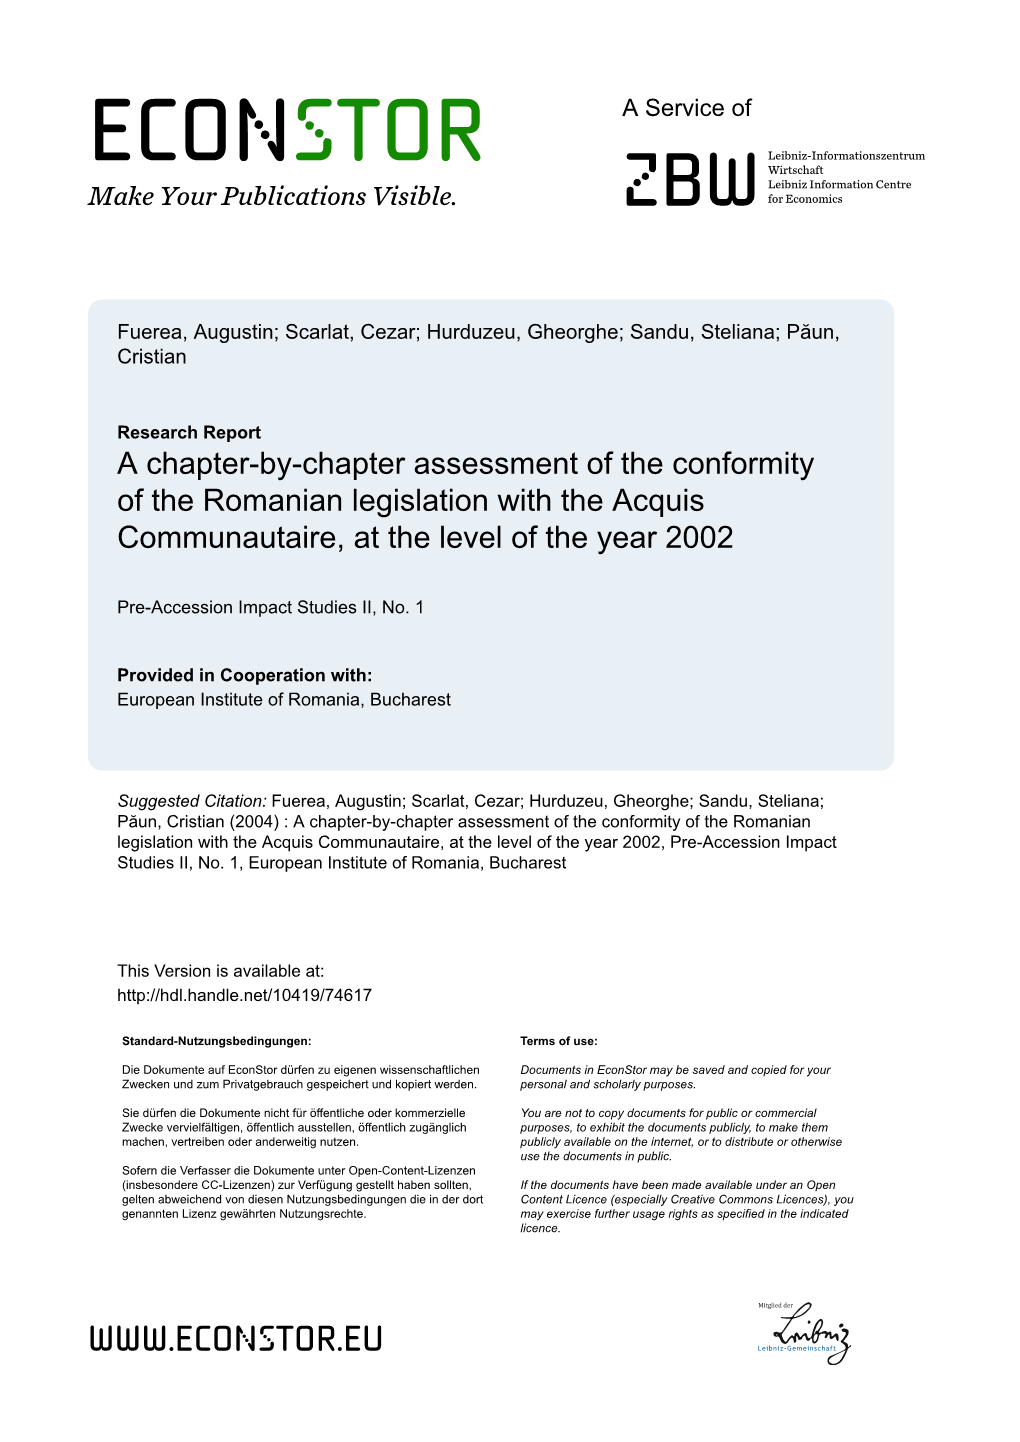 A Chapter-By-Chapter Assessment of the Conformity of the Romanian Legislation with the Acquis Communautaire, at the Level of the Year 2002